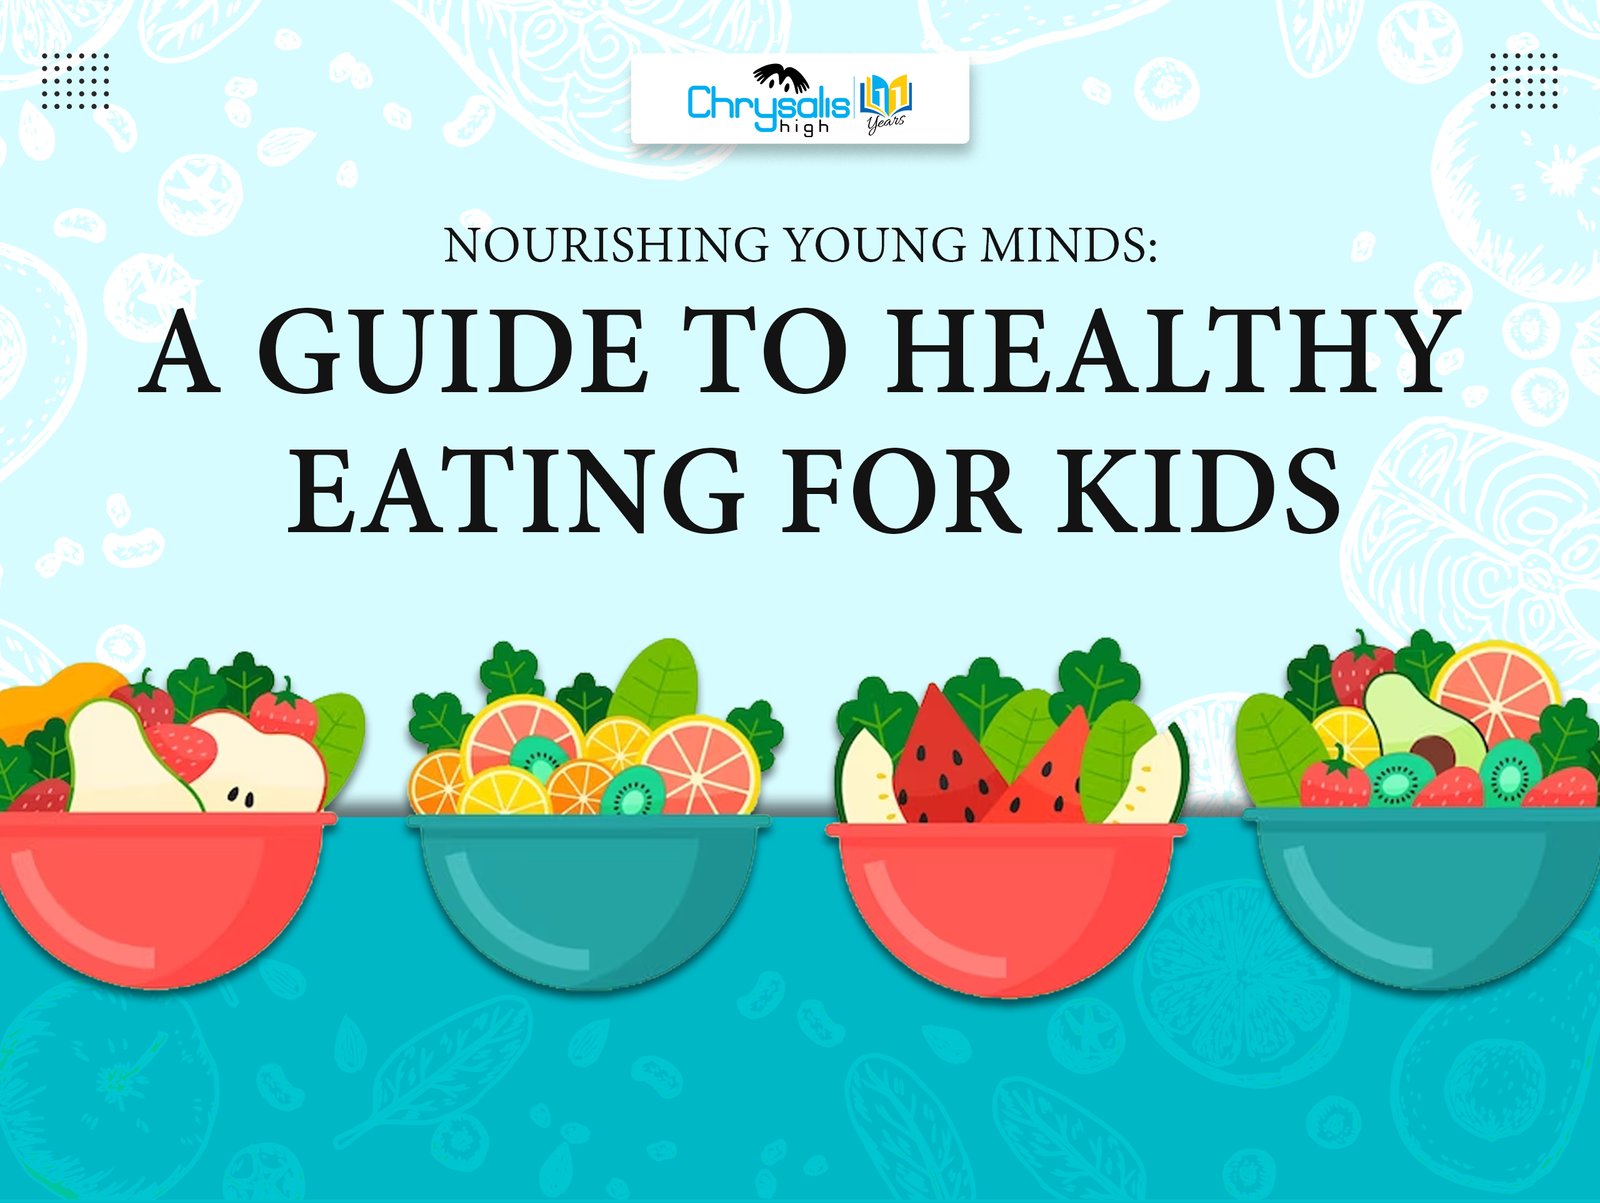 Nourishing Young Minds: A Guide to Healthy Eating for Kids